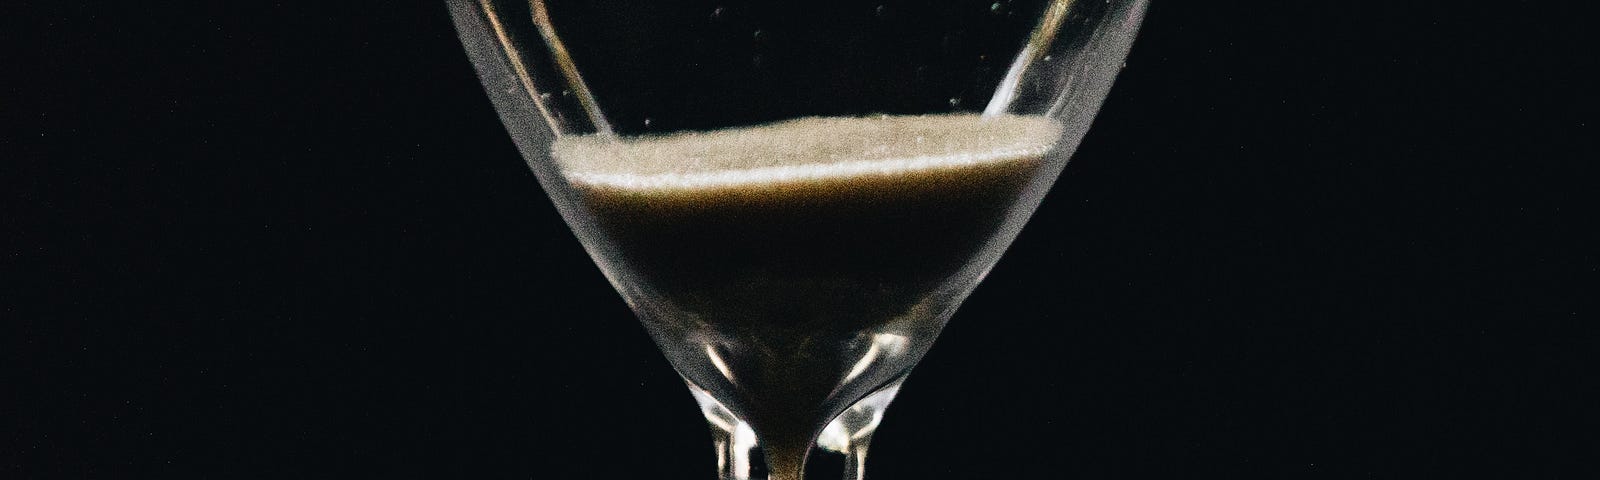 Image of an hourglass with sand.